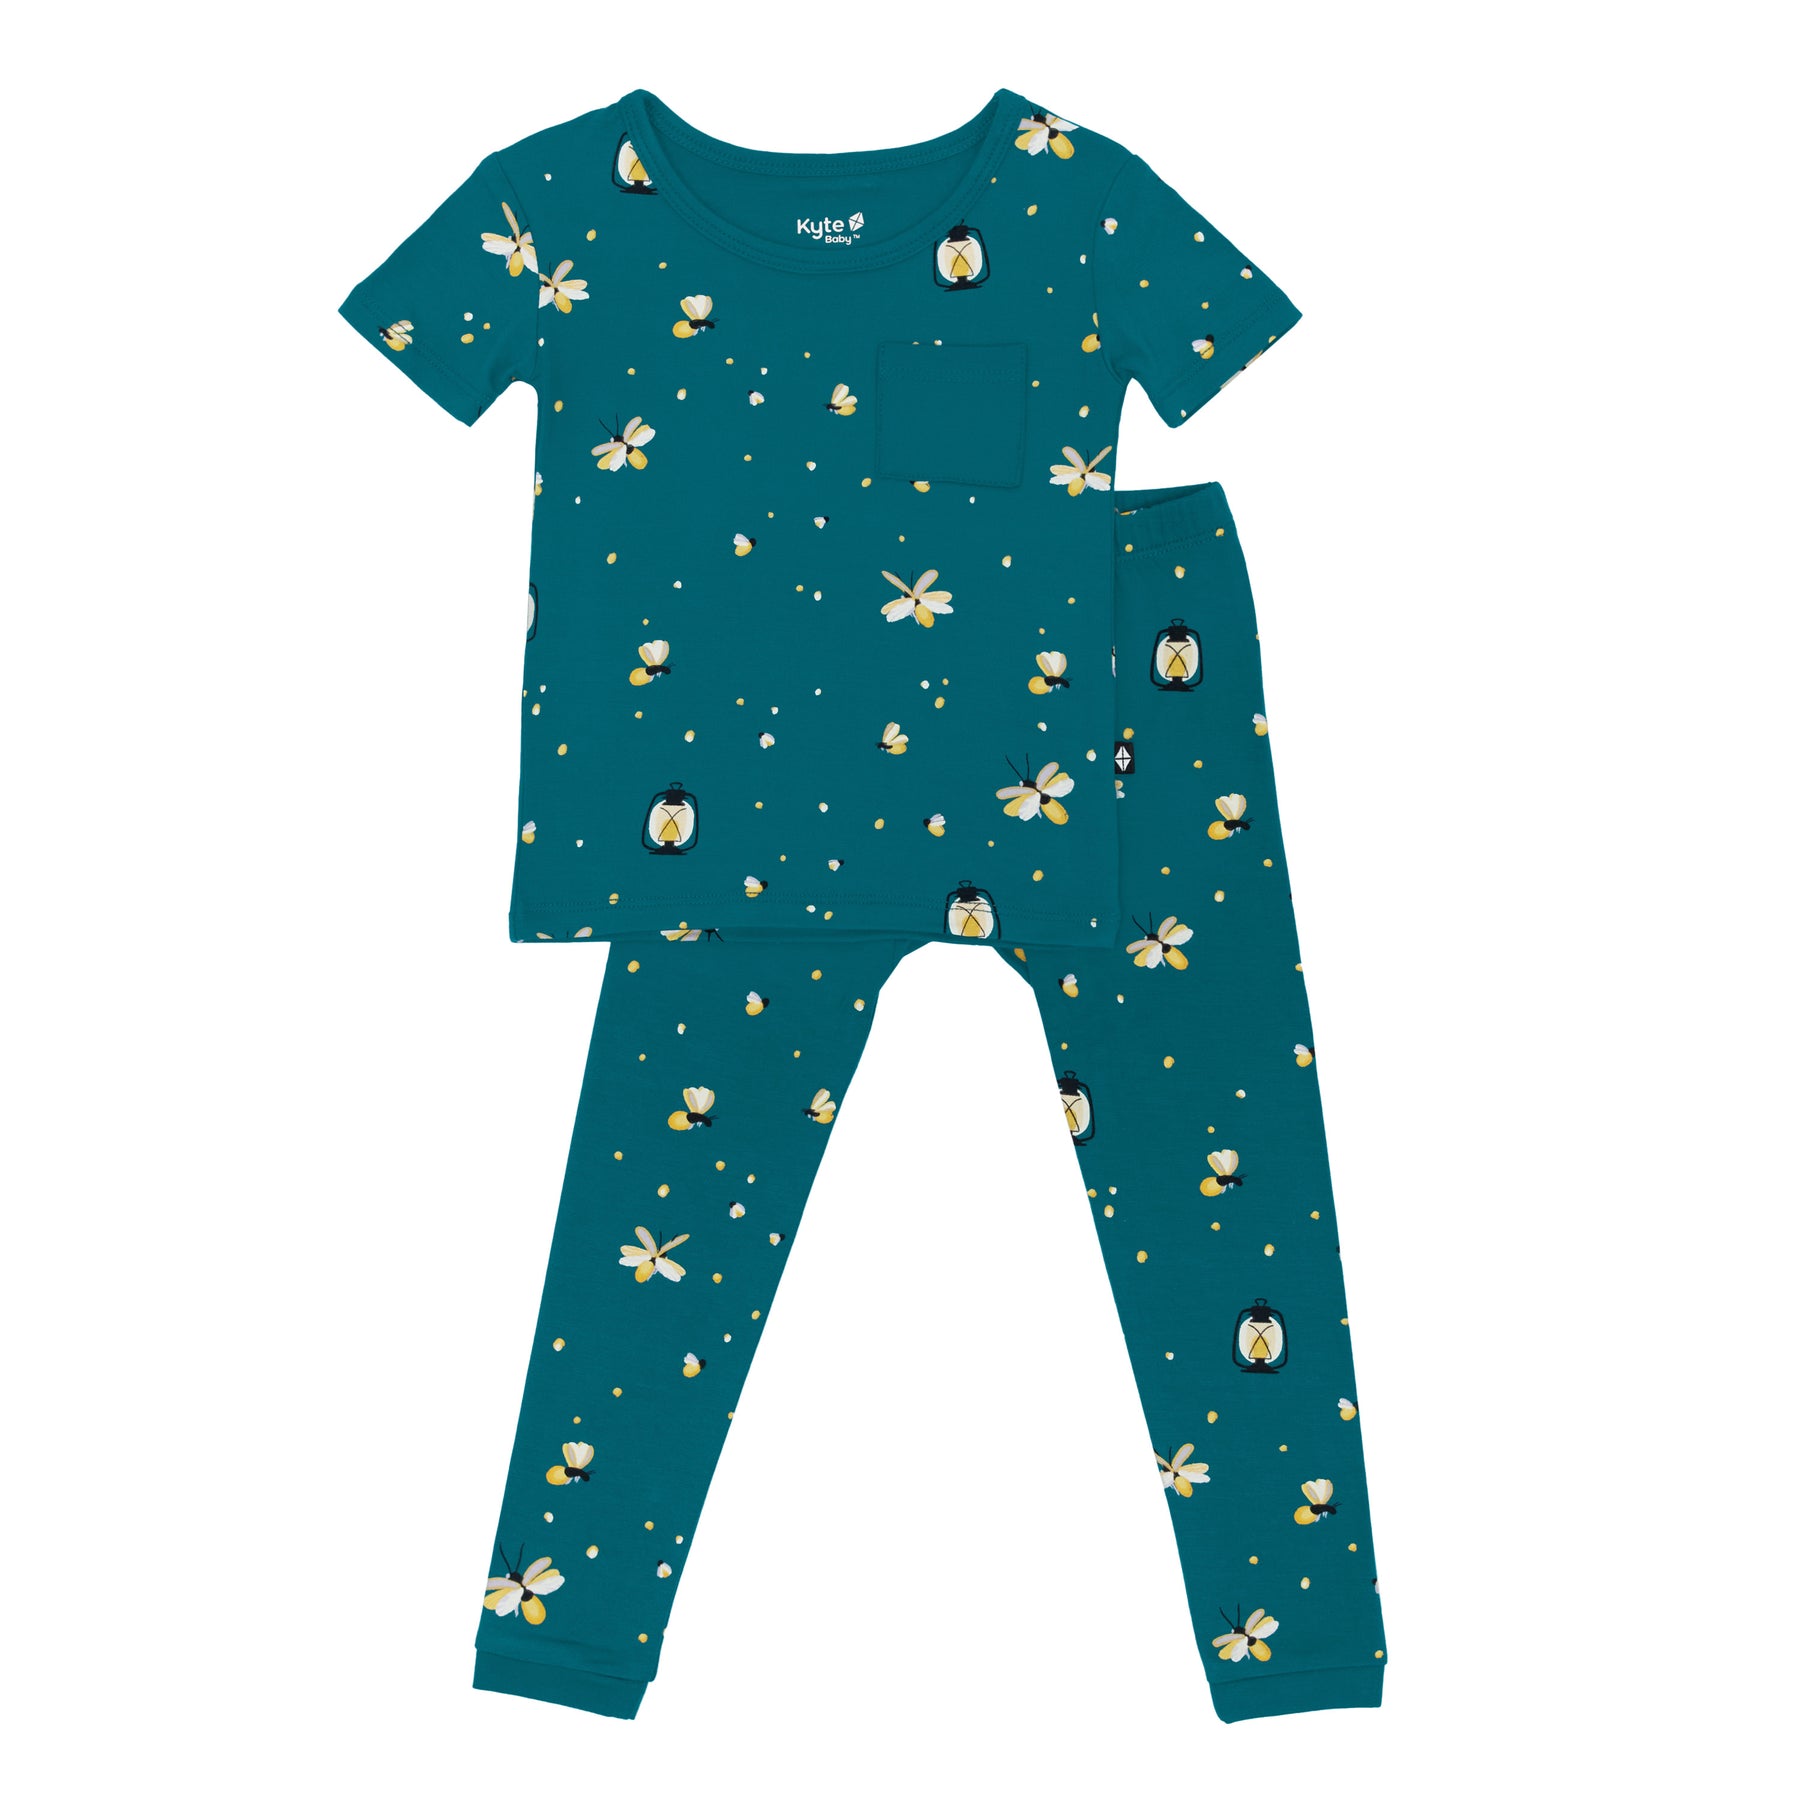 Short Sleeve with Pants Pajamas in Firefly